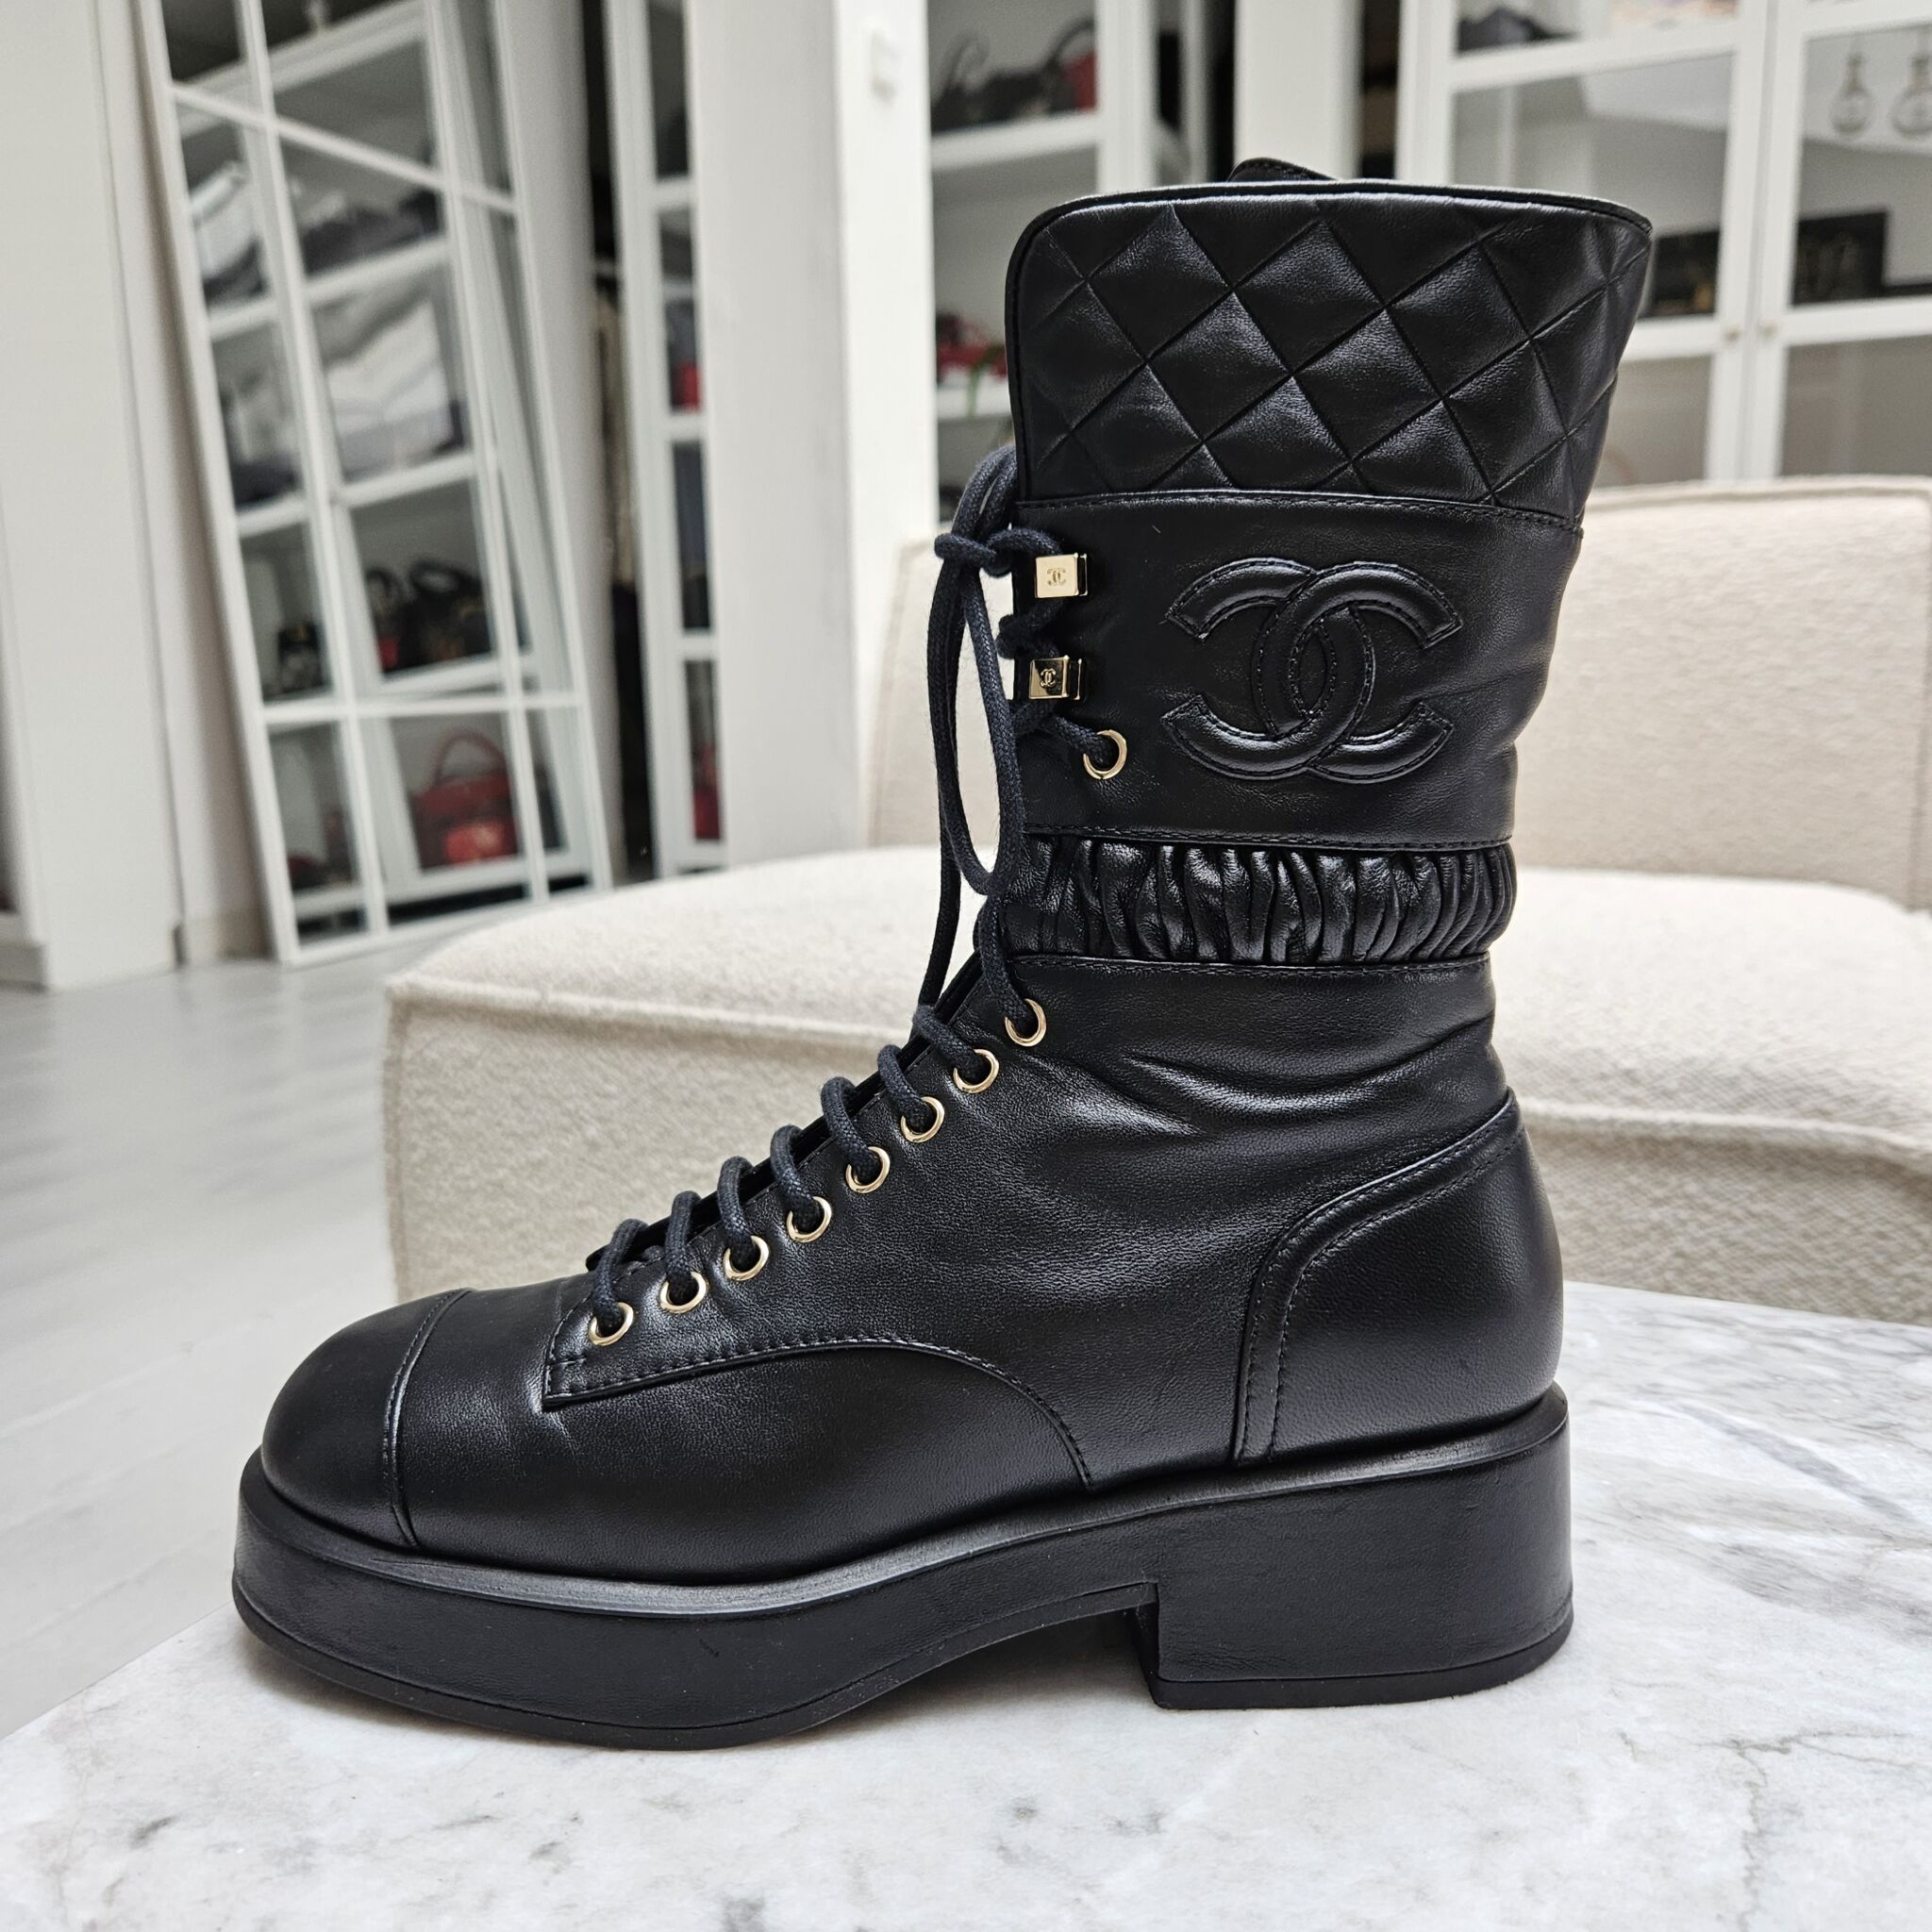 Chanel Boots, Black/White, 37.5 - Laulay Luxury